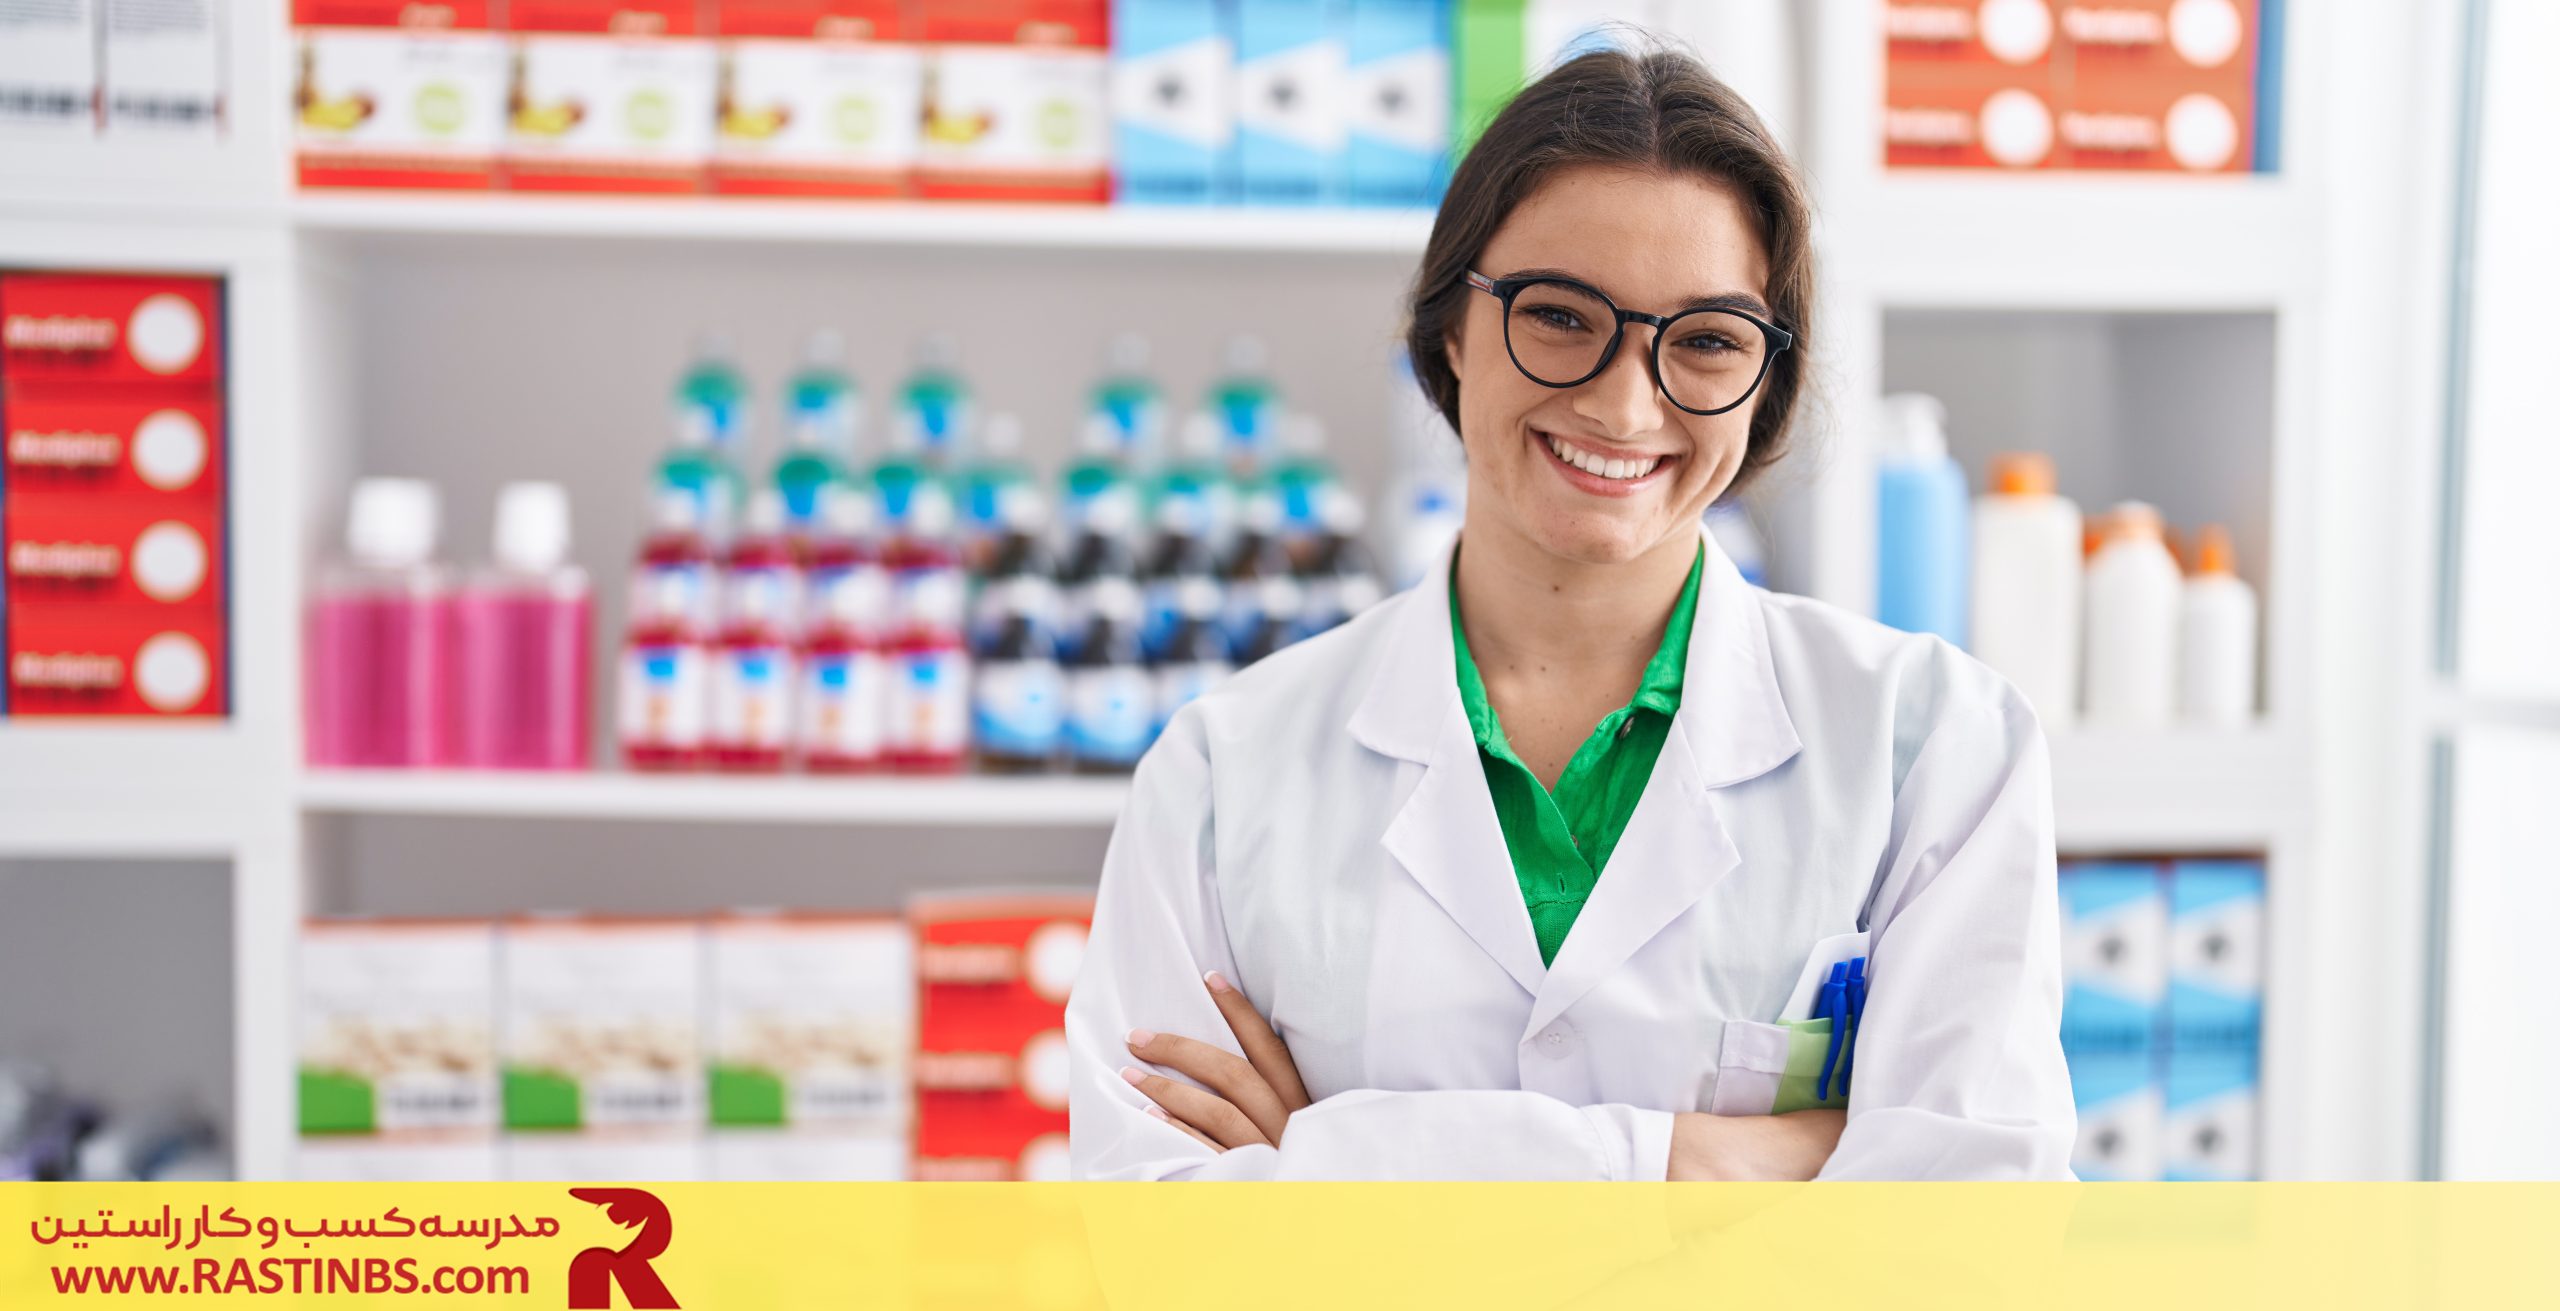 Inventory management in pharmacies